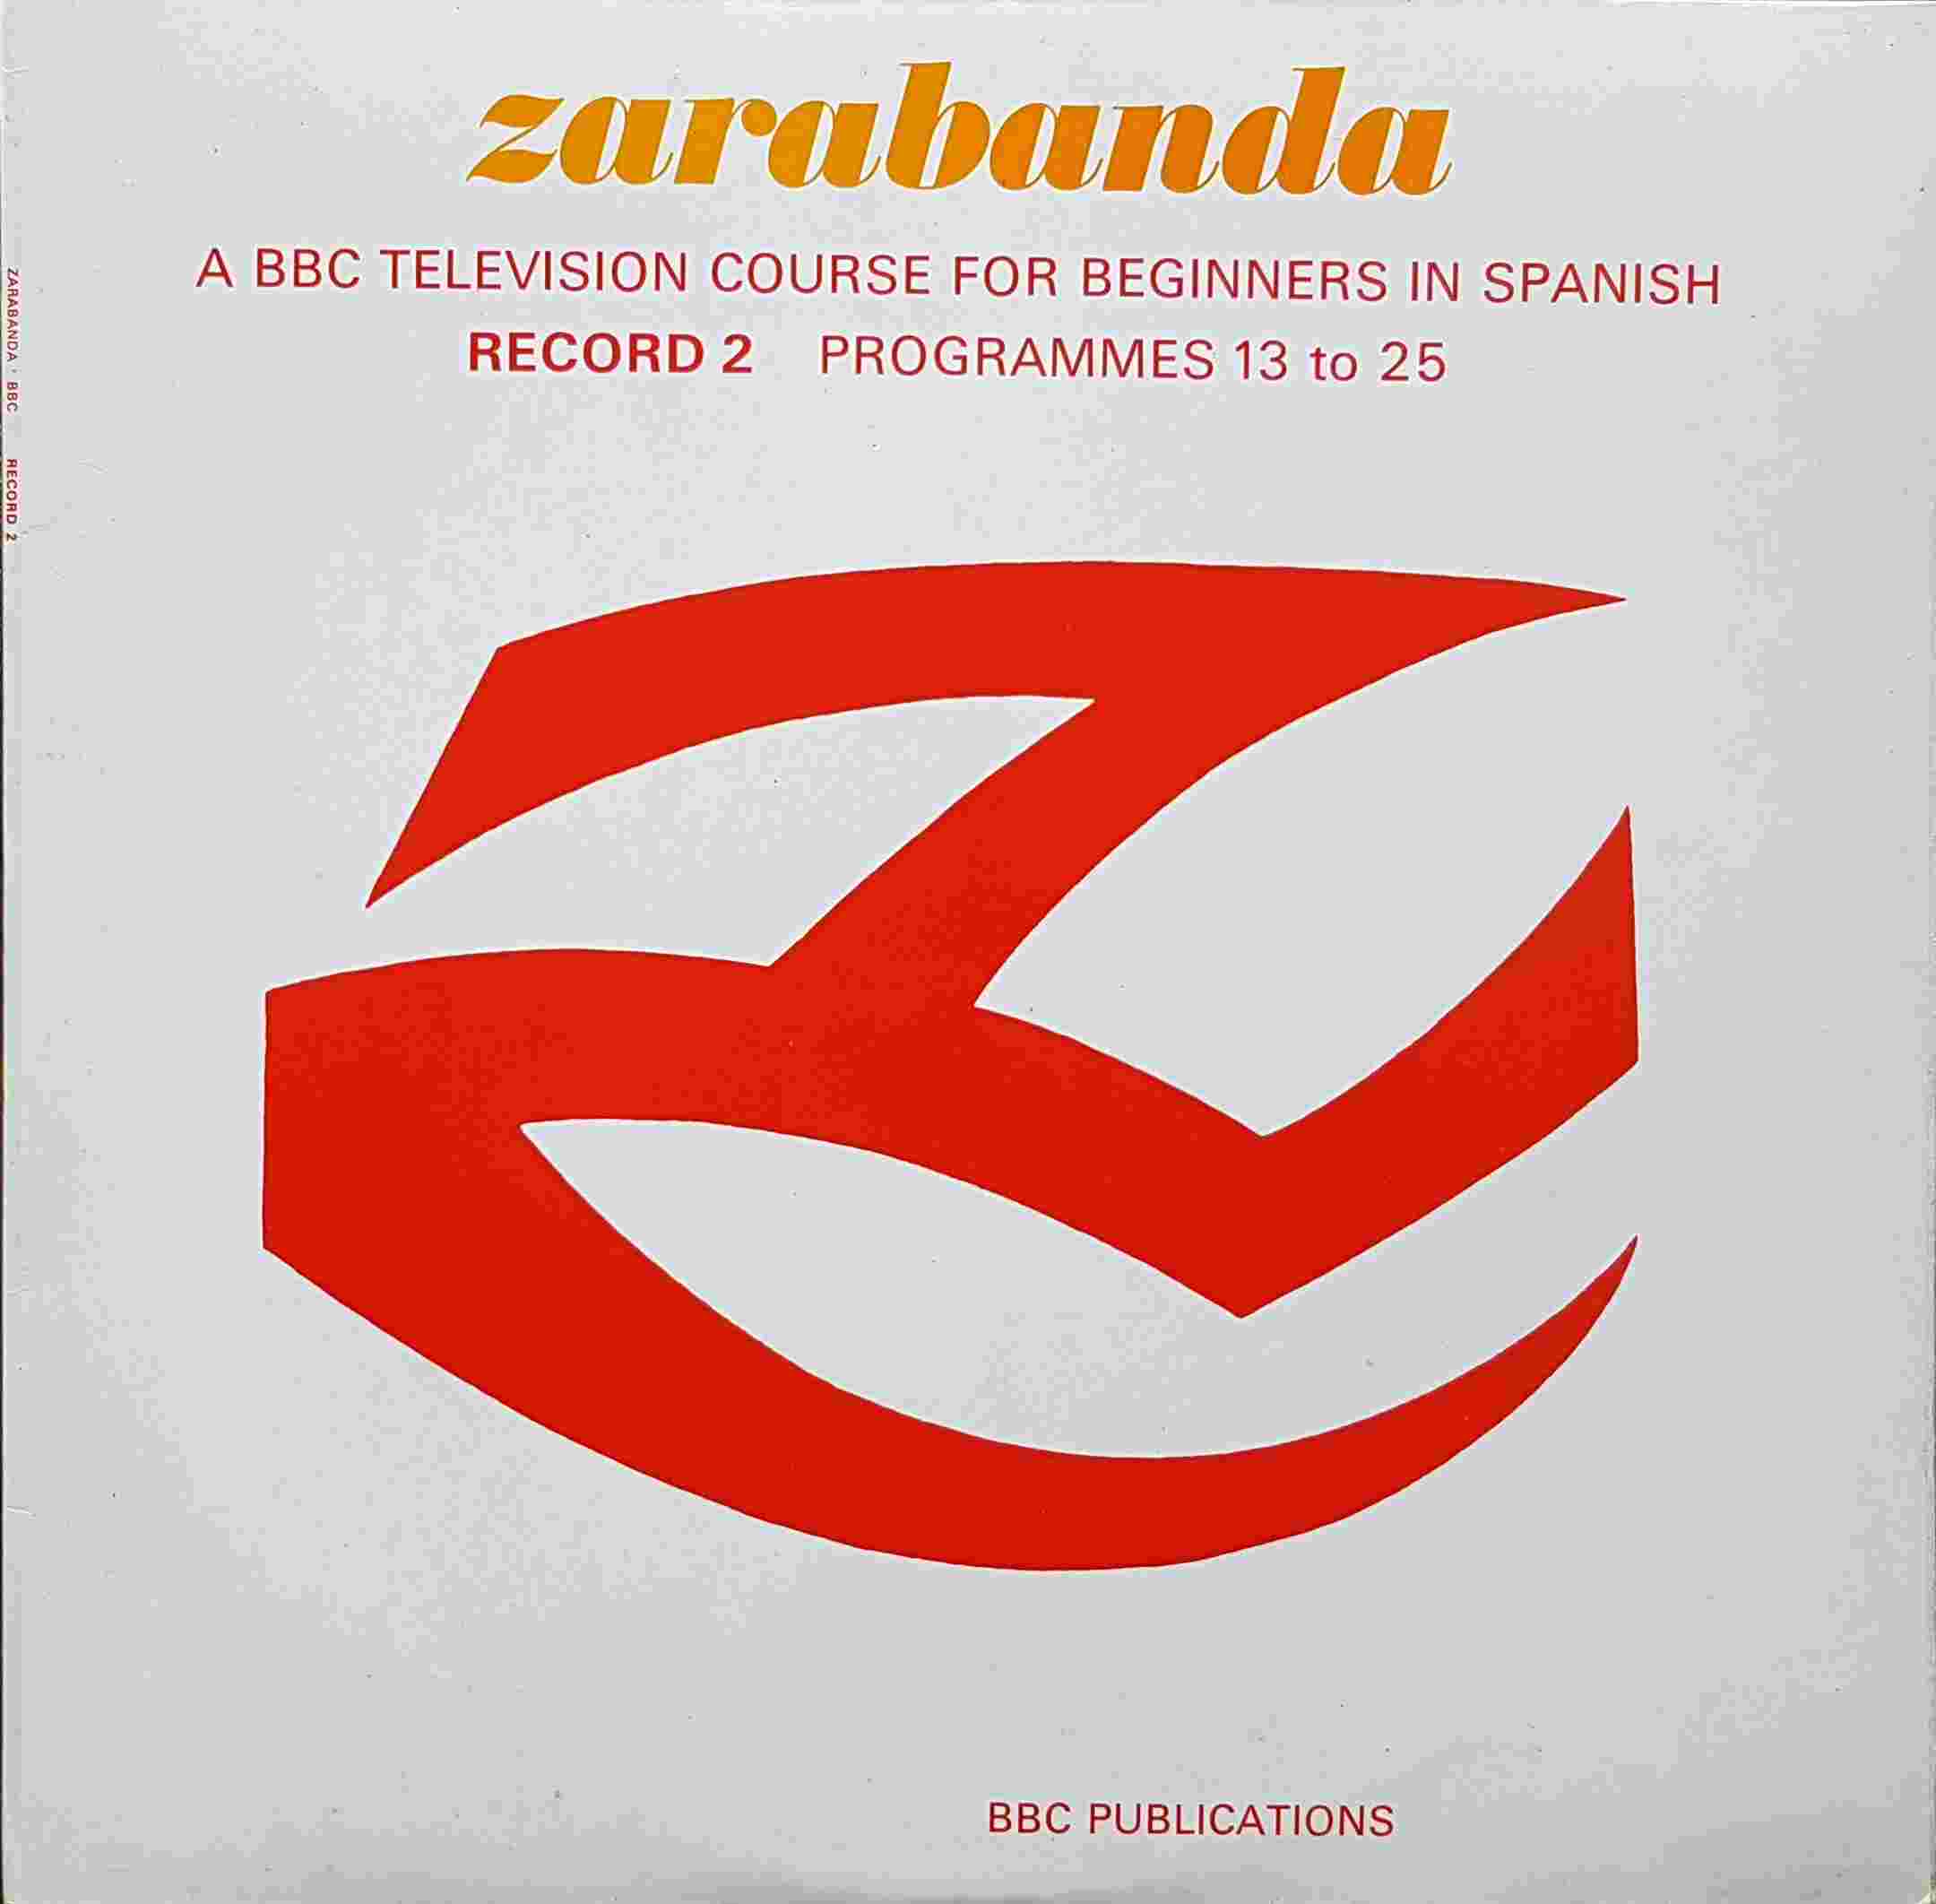 Picture of OP 169/170 Zarabanda - A BBC Television course of 25 programmes for beginners in Spanish - Record 2 - Programmes 13 - 25 by artist Milo Sperber / Manuel Fernandez Gasalla from the BBC albums - Records and Tapes library